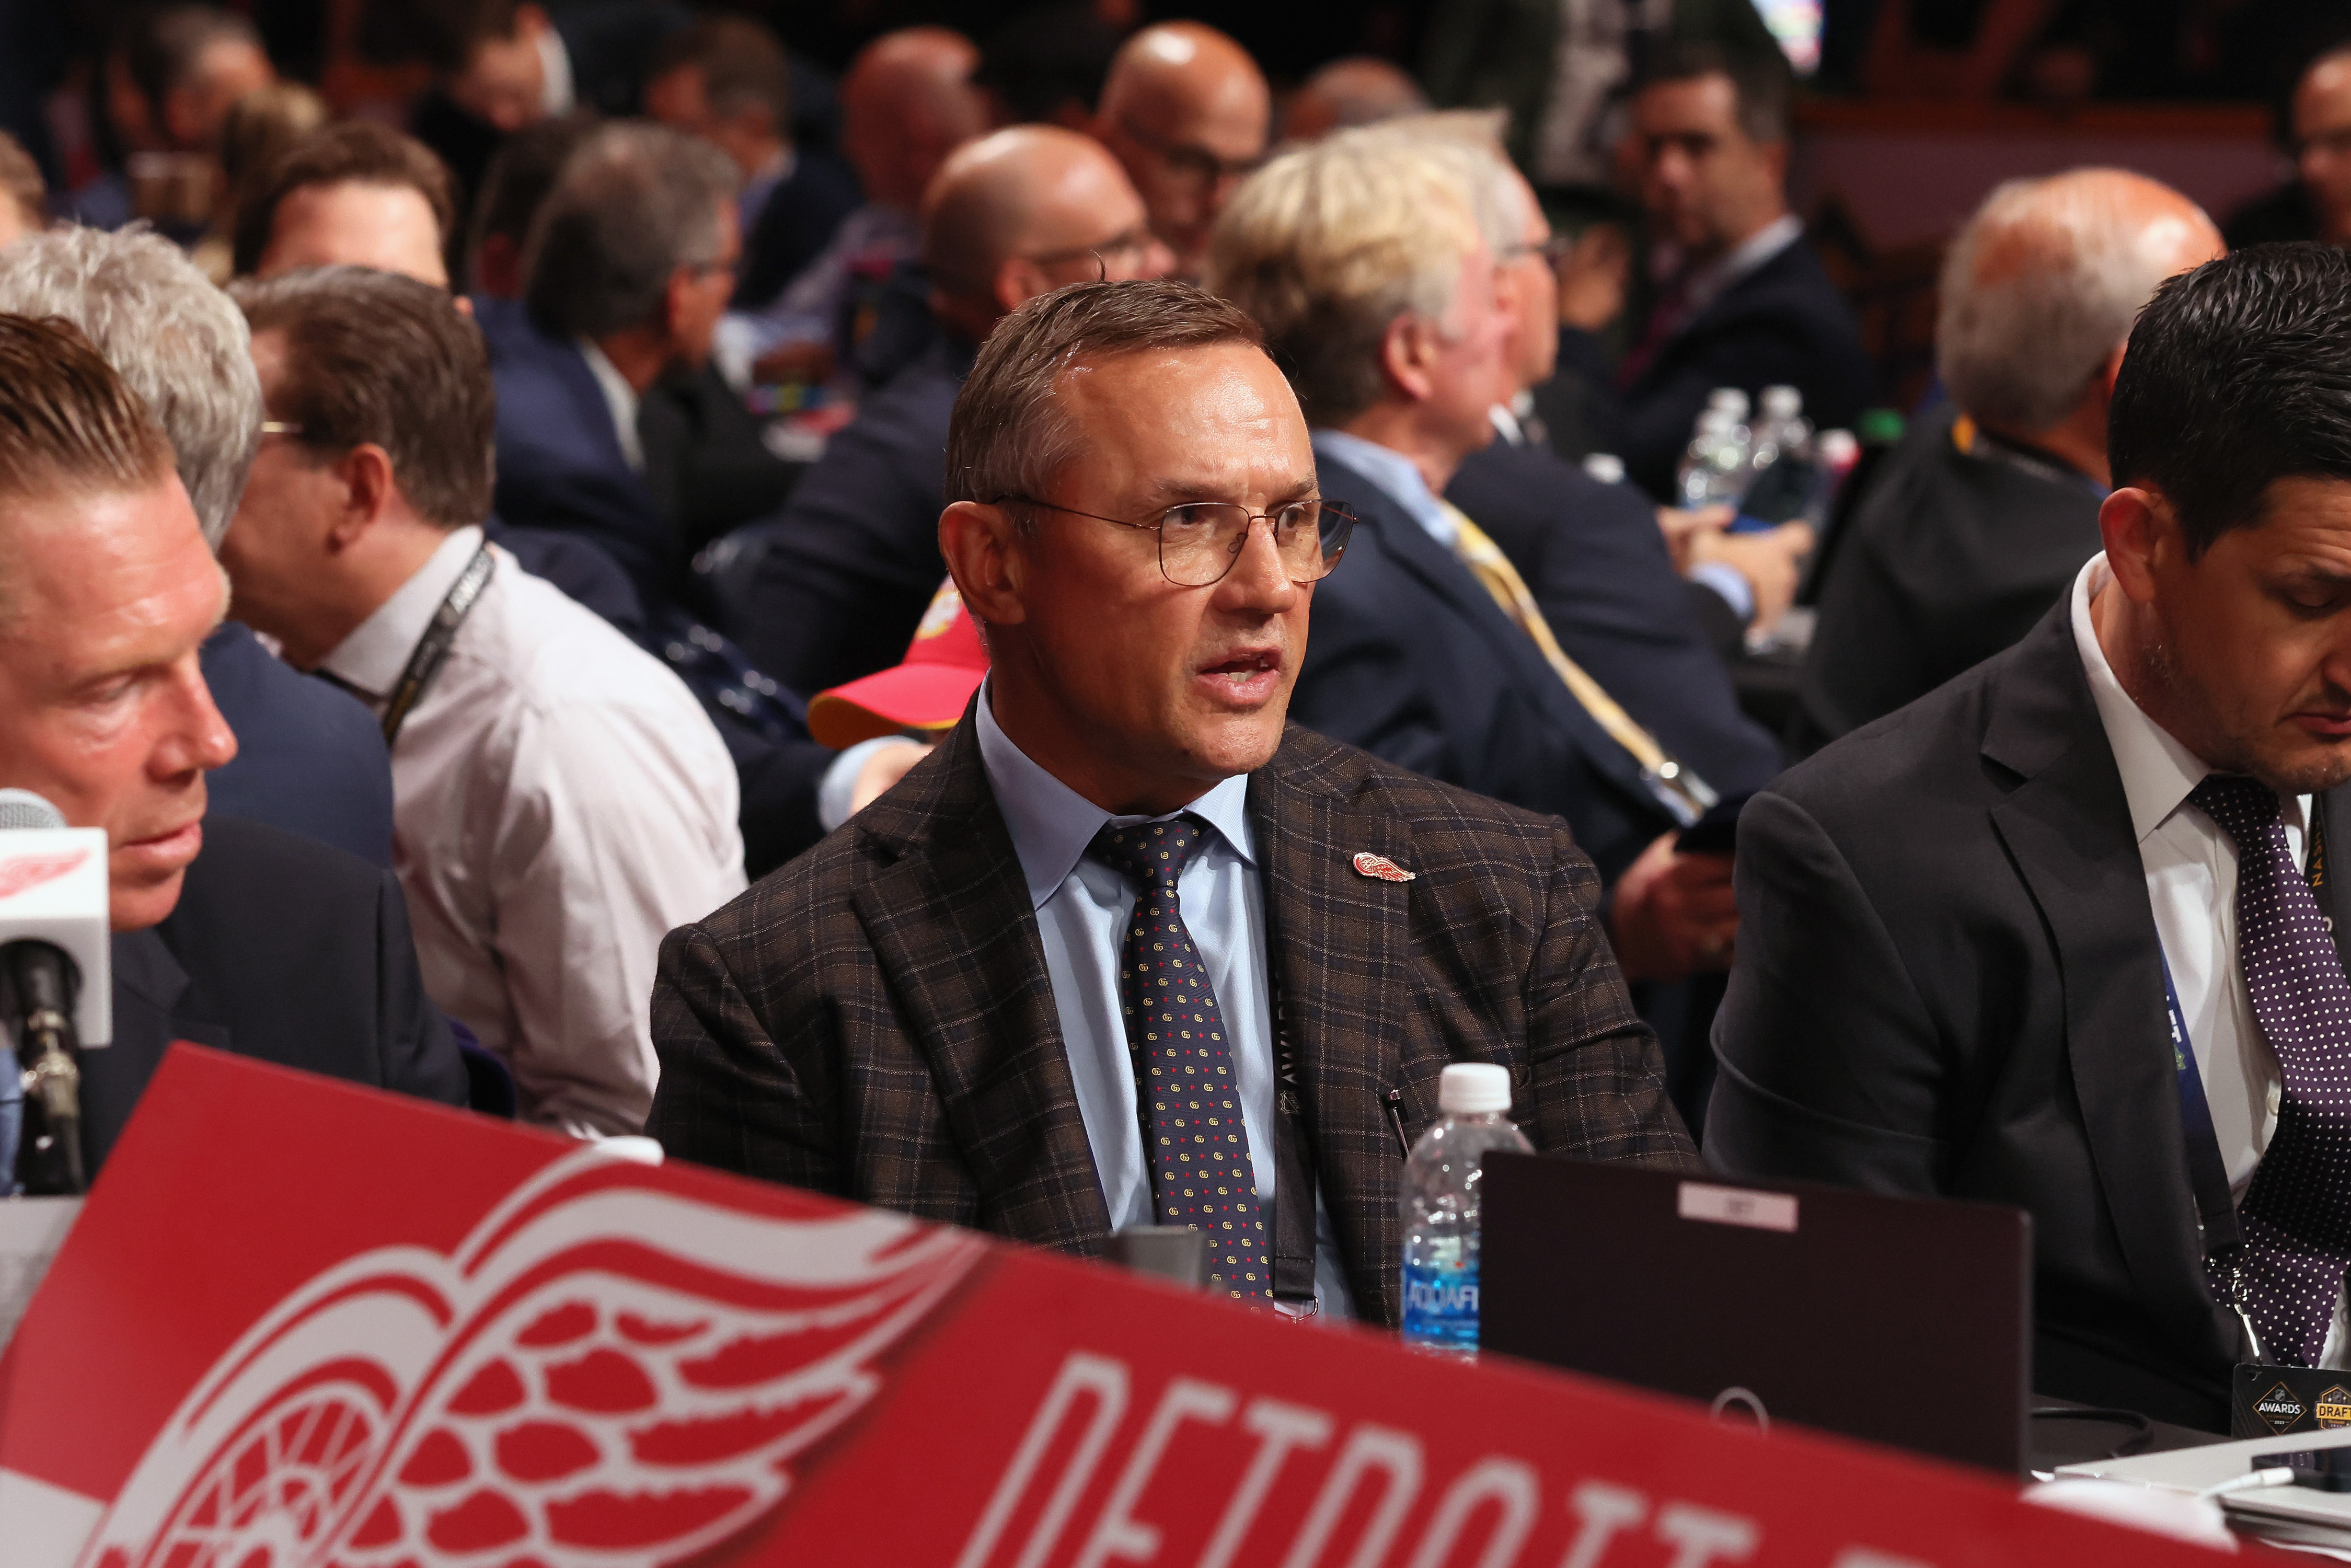 Steve Yzerman of the Detroit Red WIngs attends the 2023 NHL Draft at the Bridgestone Arena on June 29, 2023 in Nashville, Tennessee.